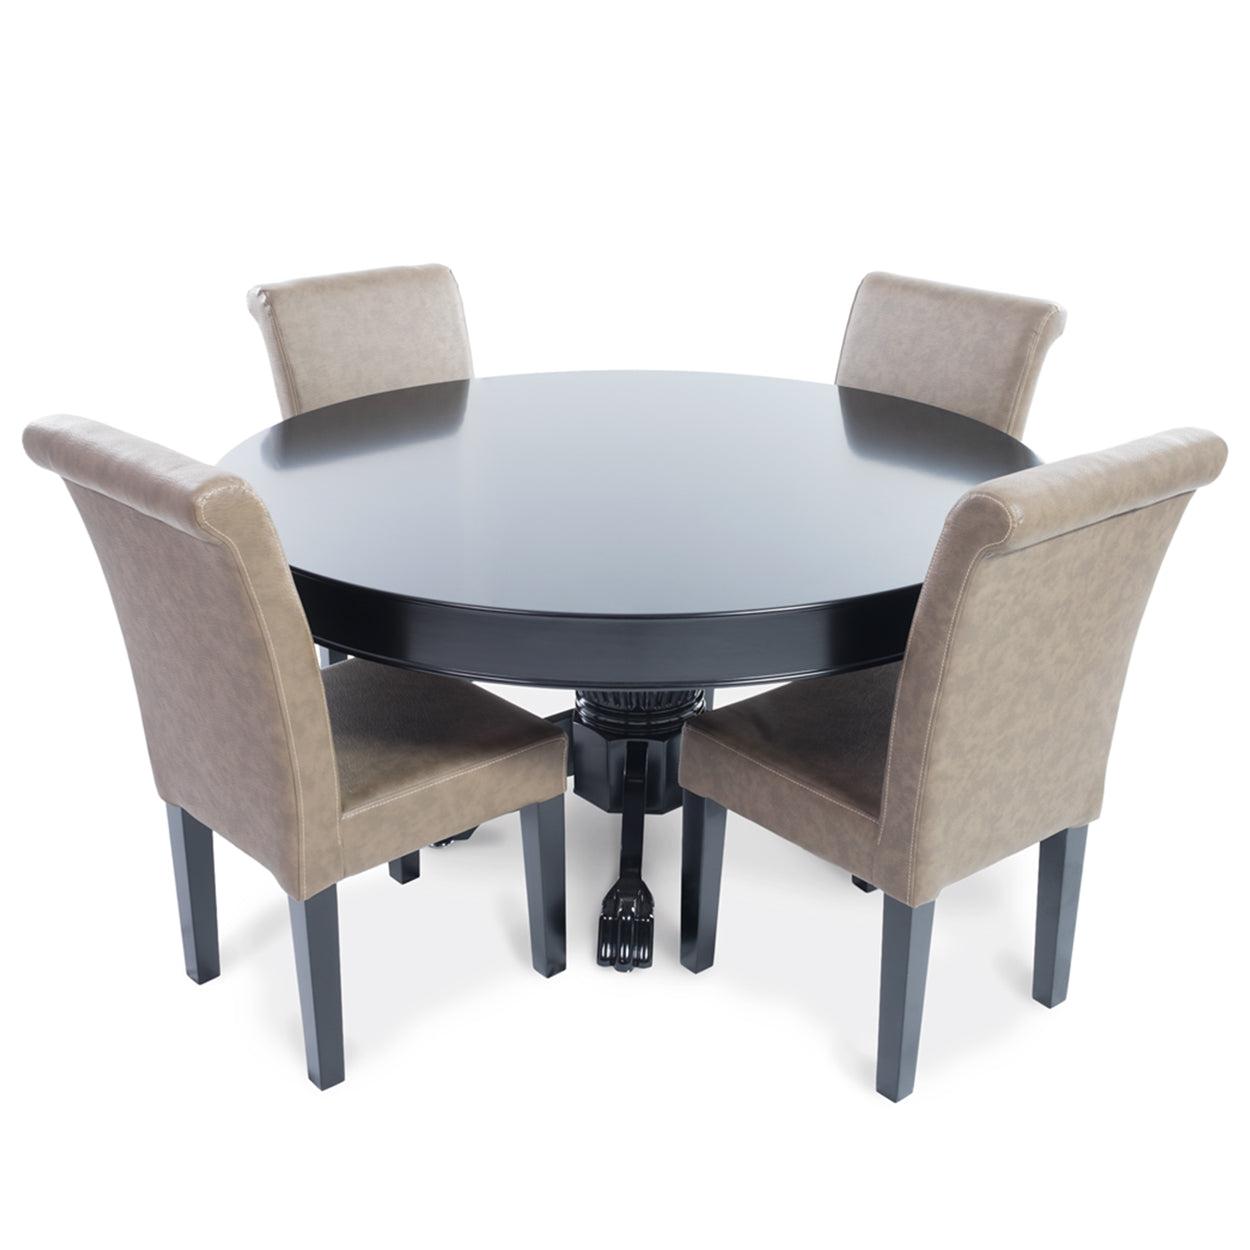 BBO The Nighthawk Poker Table Dining With Lounge chair